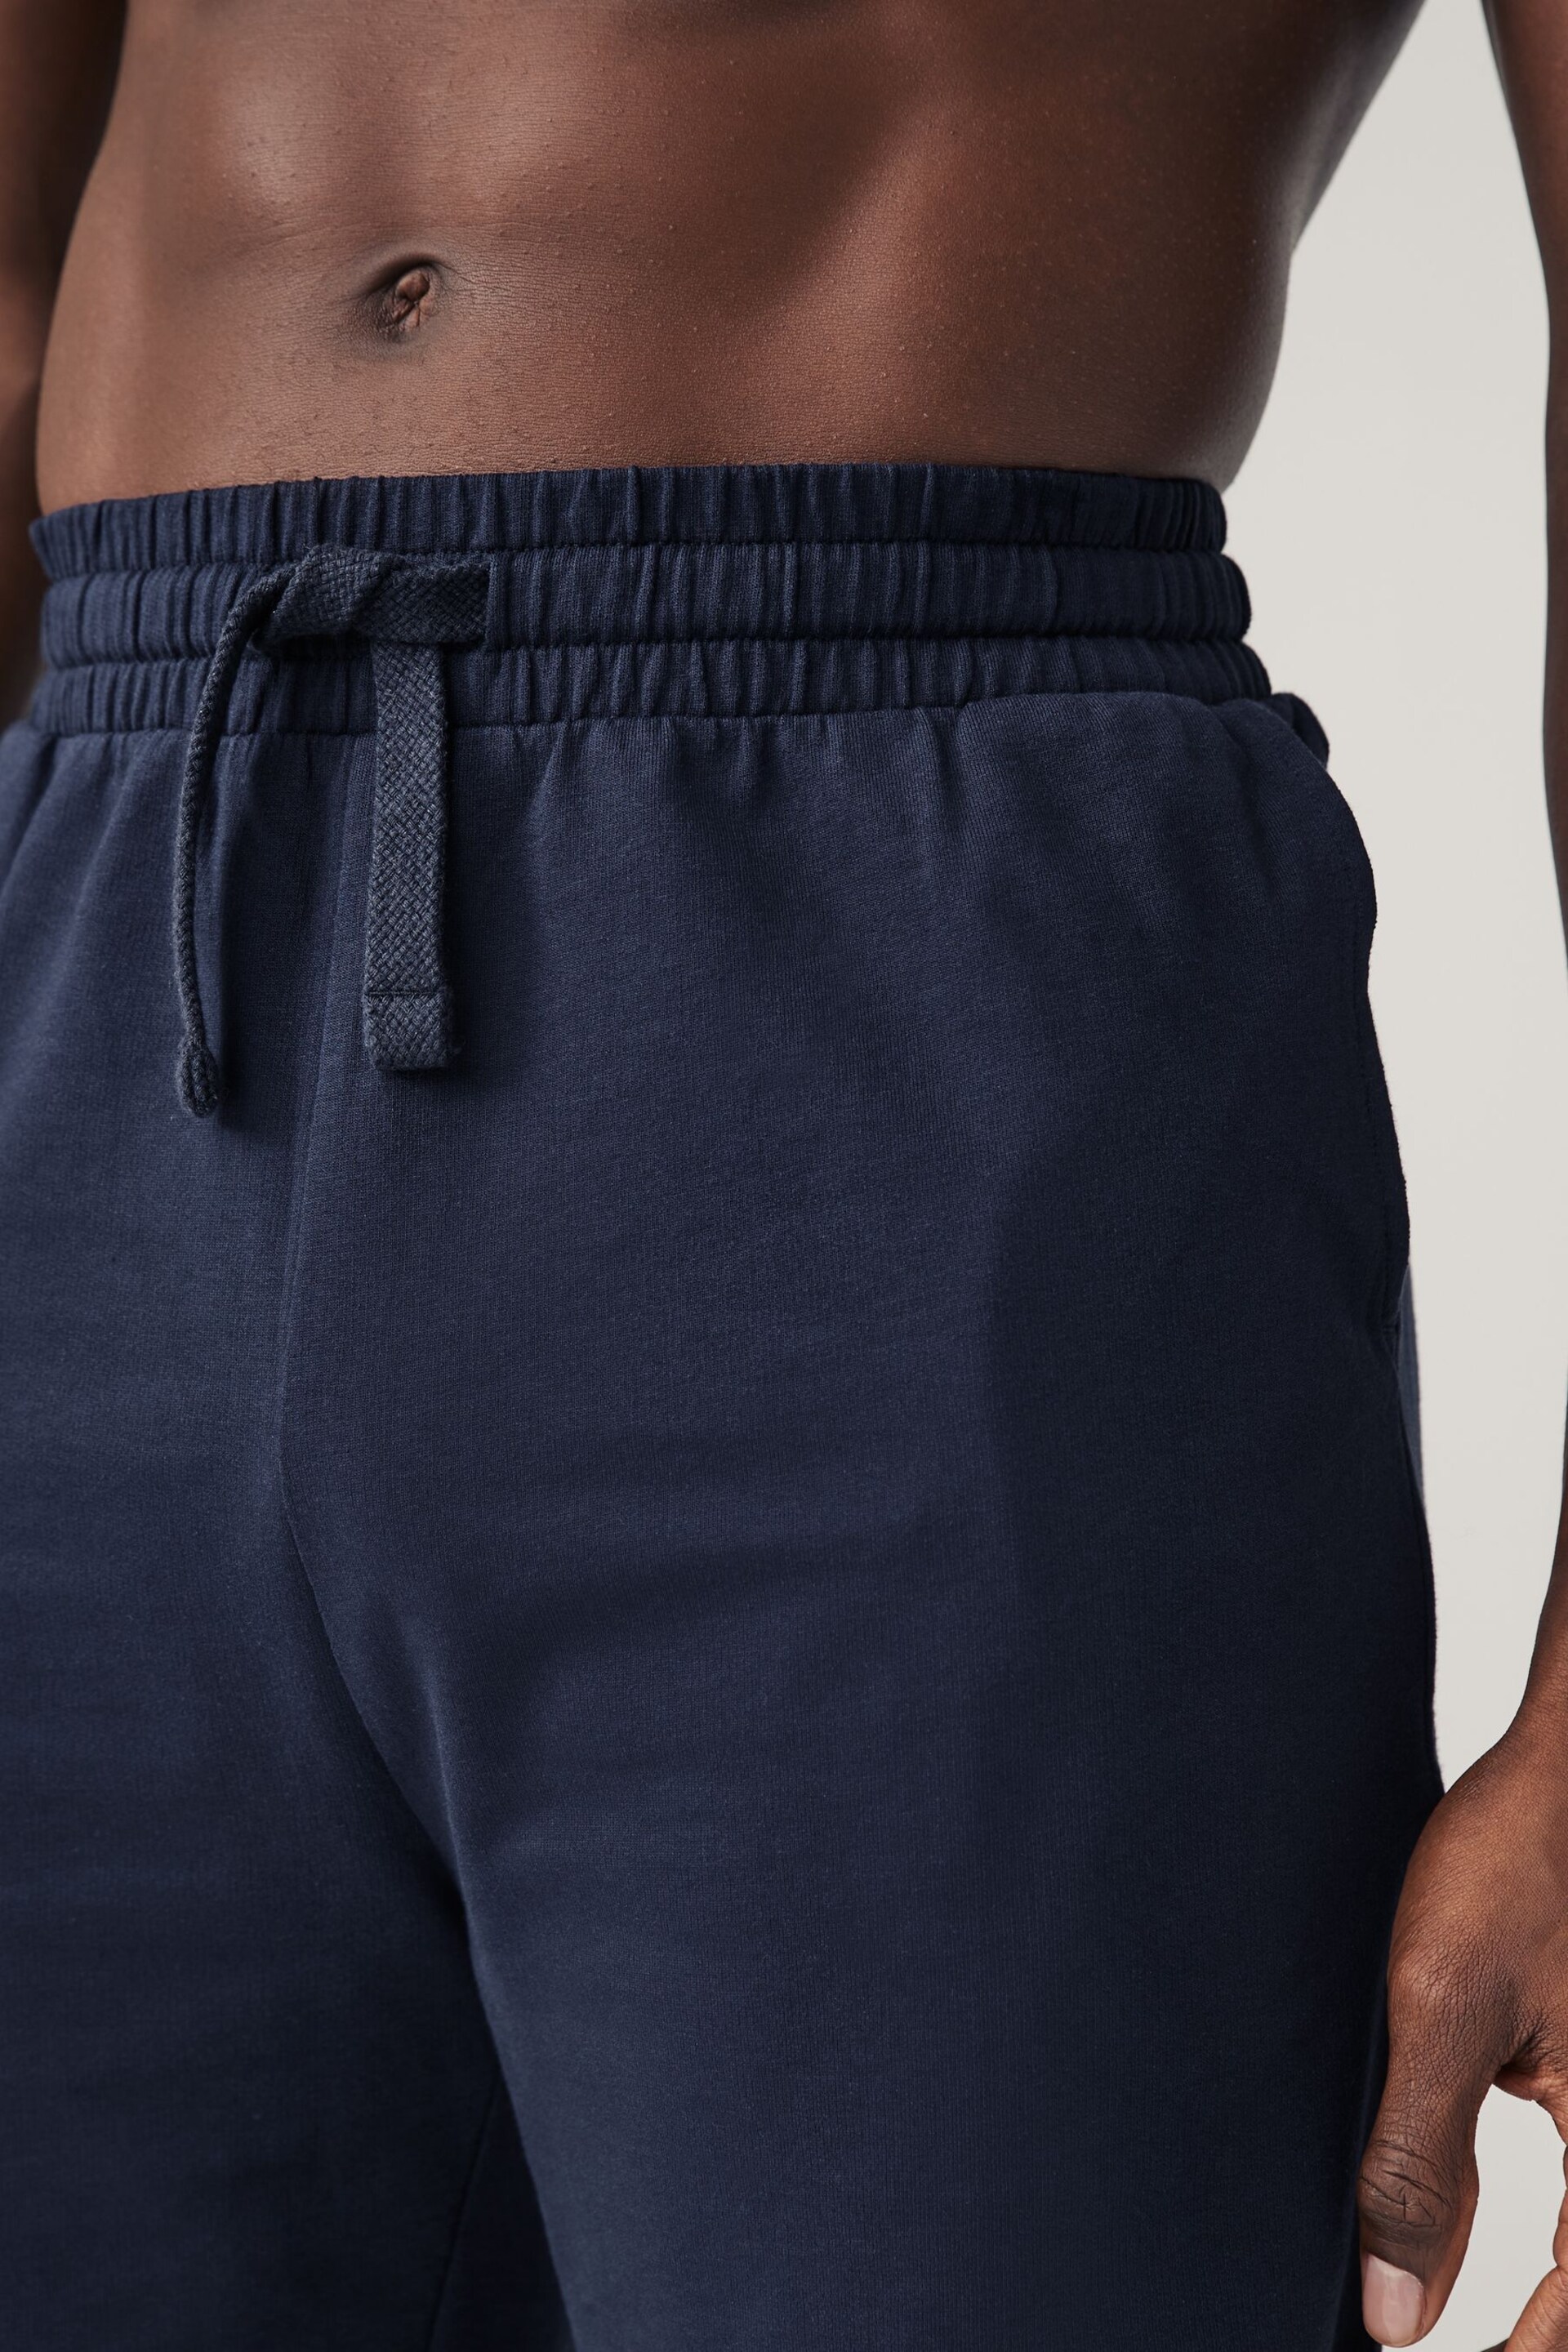 Navy Blue Lightweight Jogger Shorts 2 Pack - Image 5 of 11